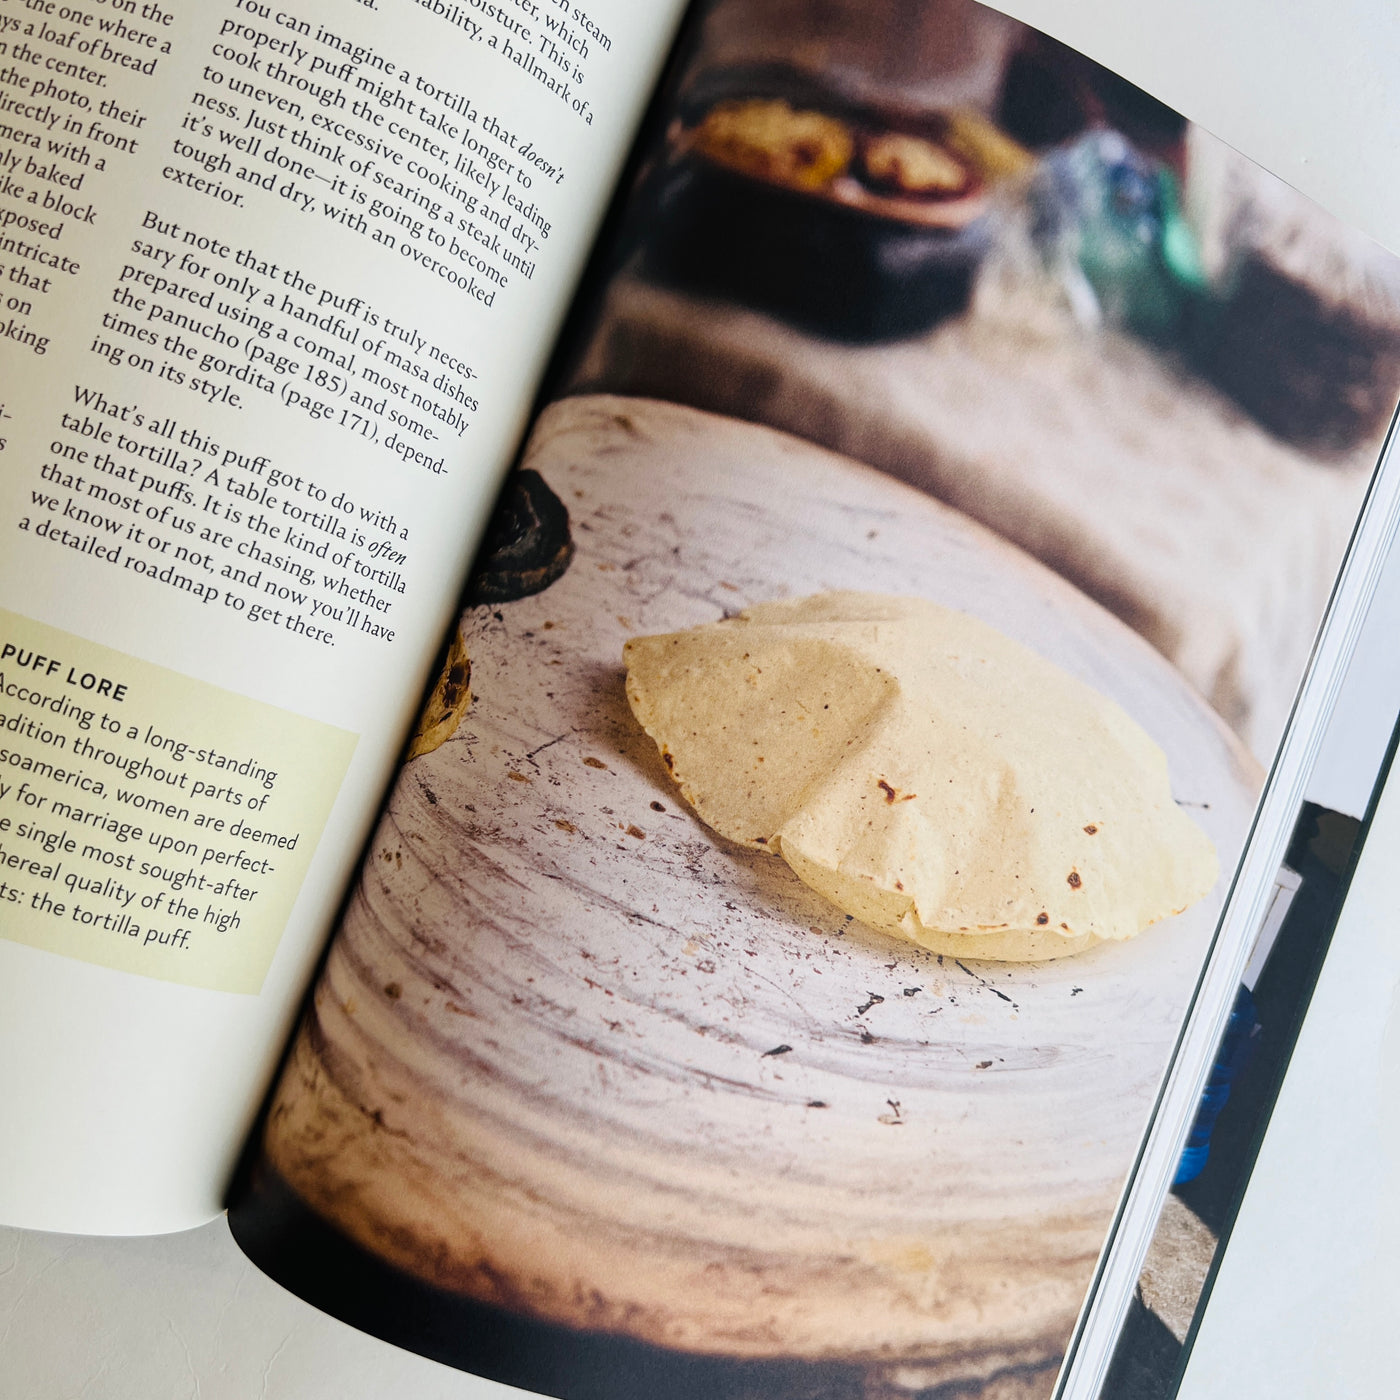 A page of the cookbook with an image of a puffed up corn torilla on a traditional Mexican comal.